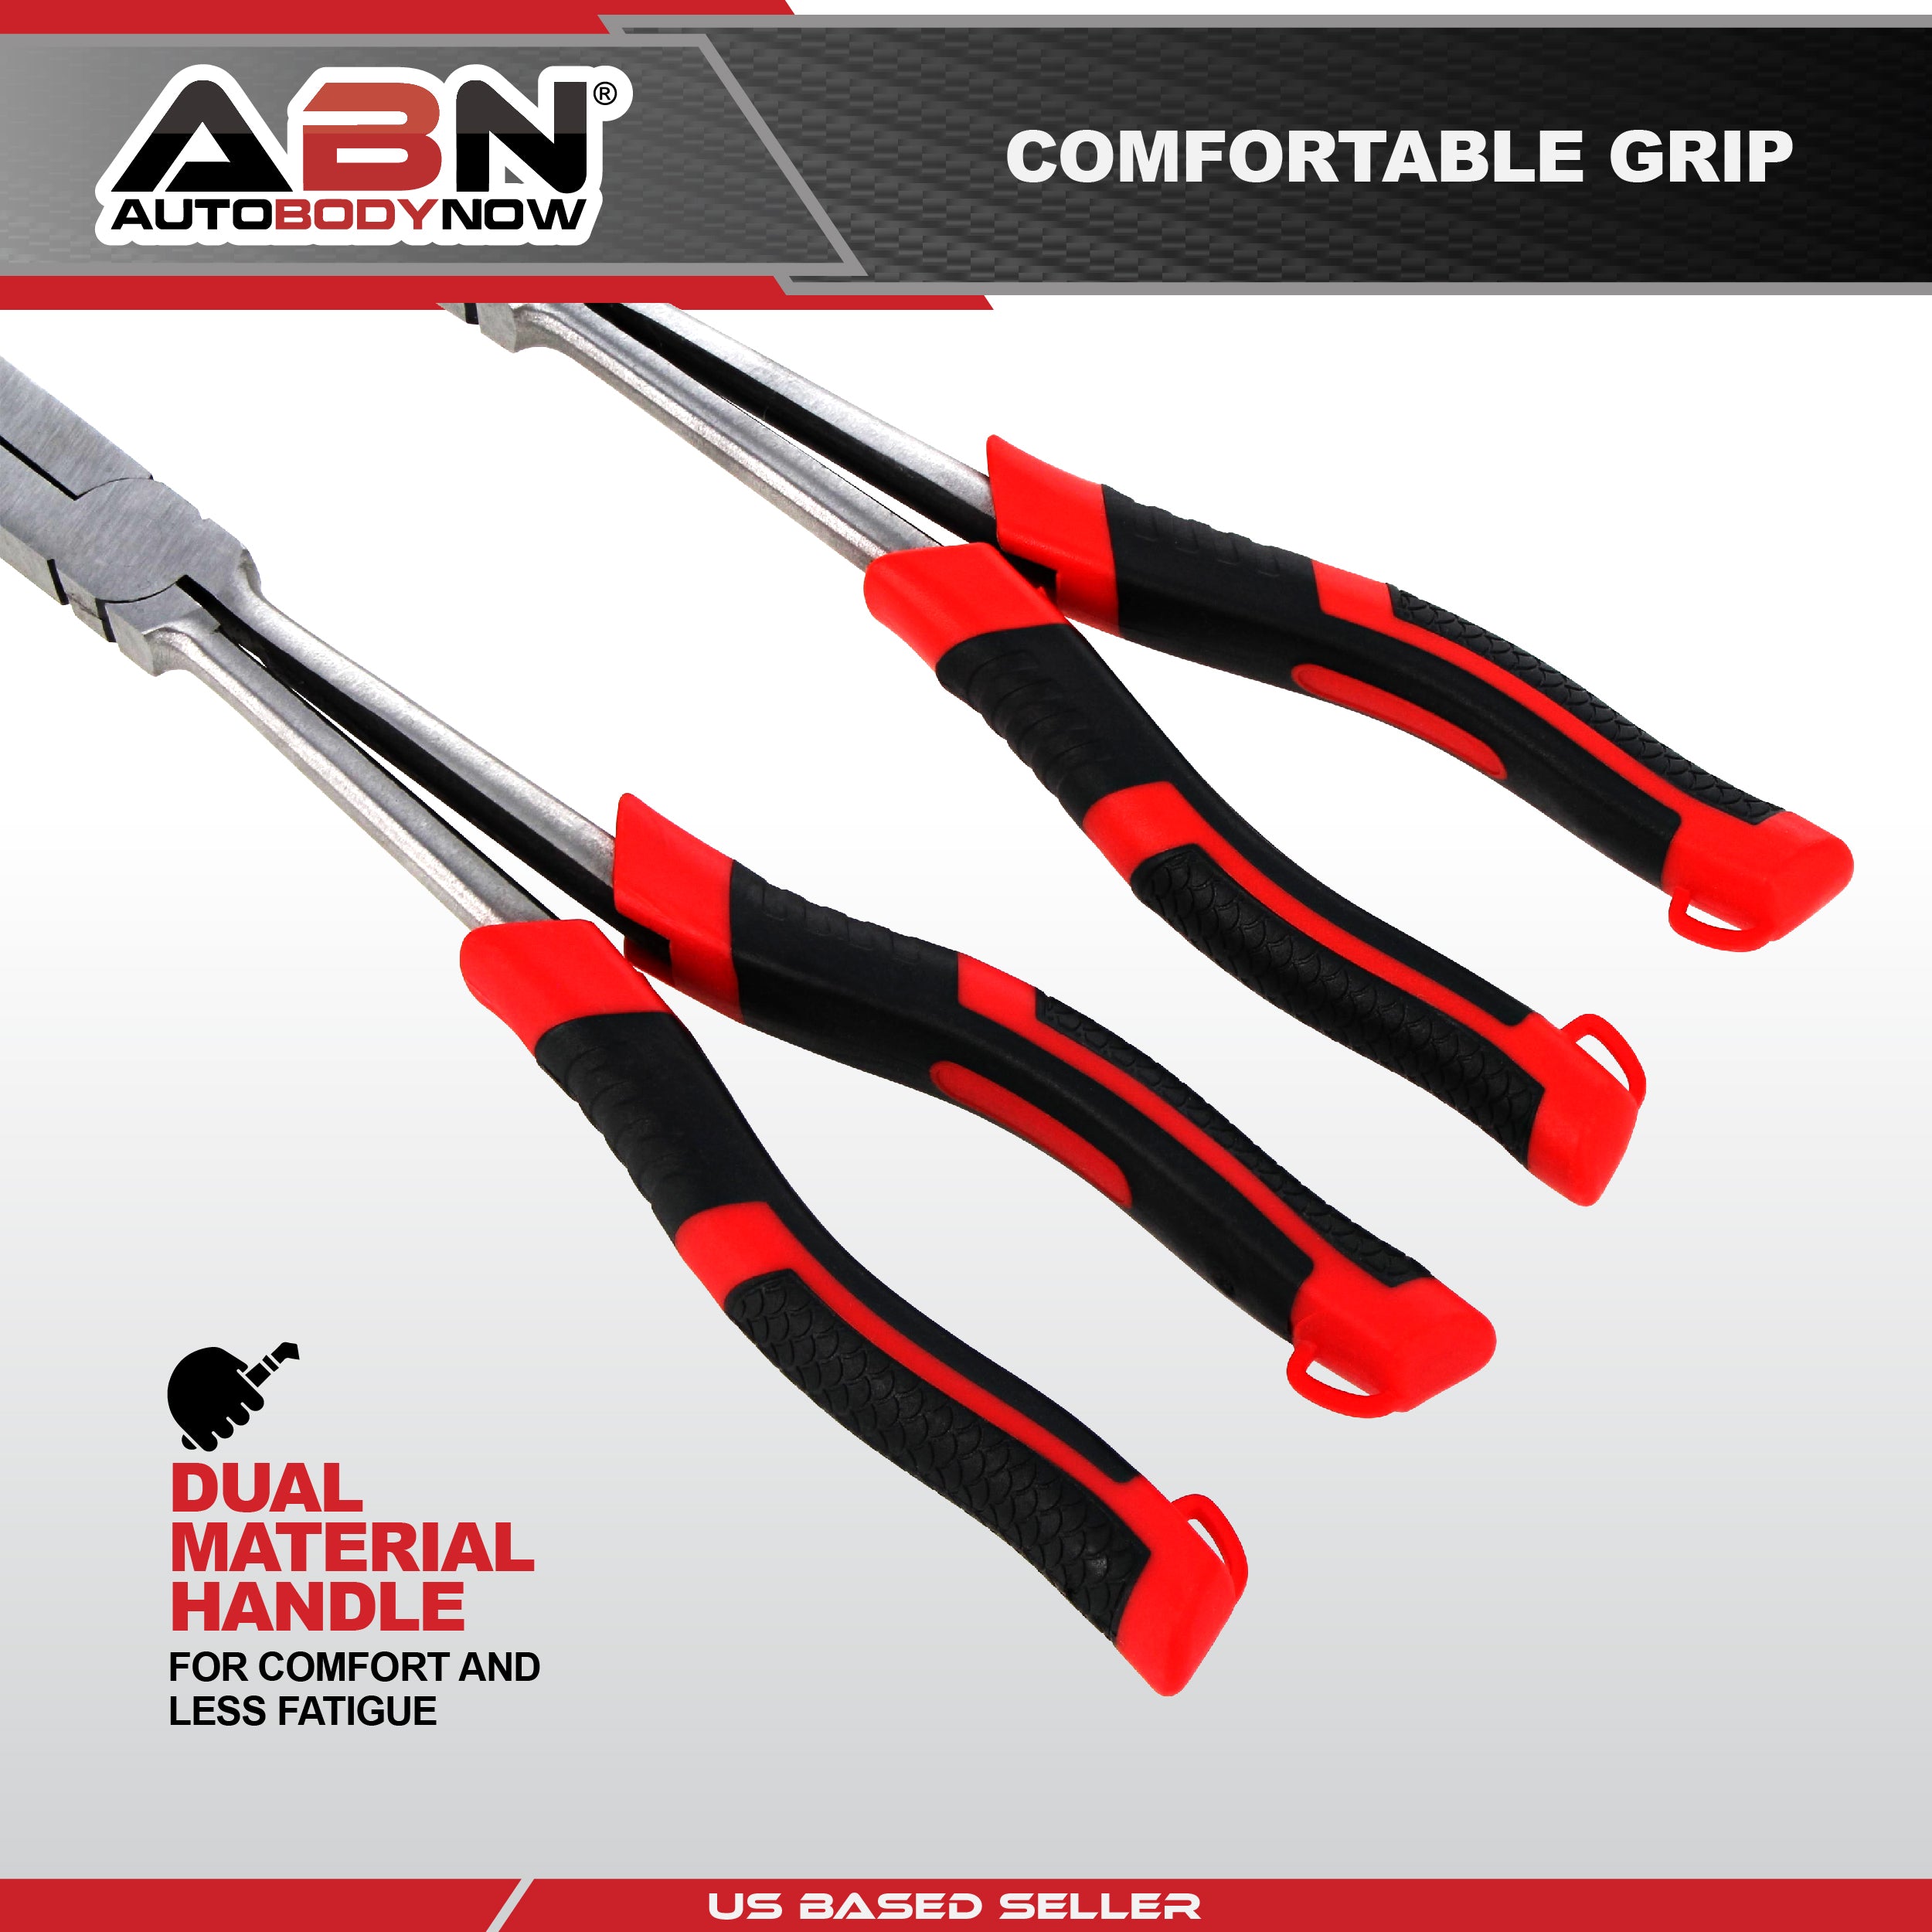 Long Reach Pliers 2 Pack - Straight and Bent Needle Nose Pliers Set